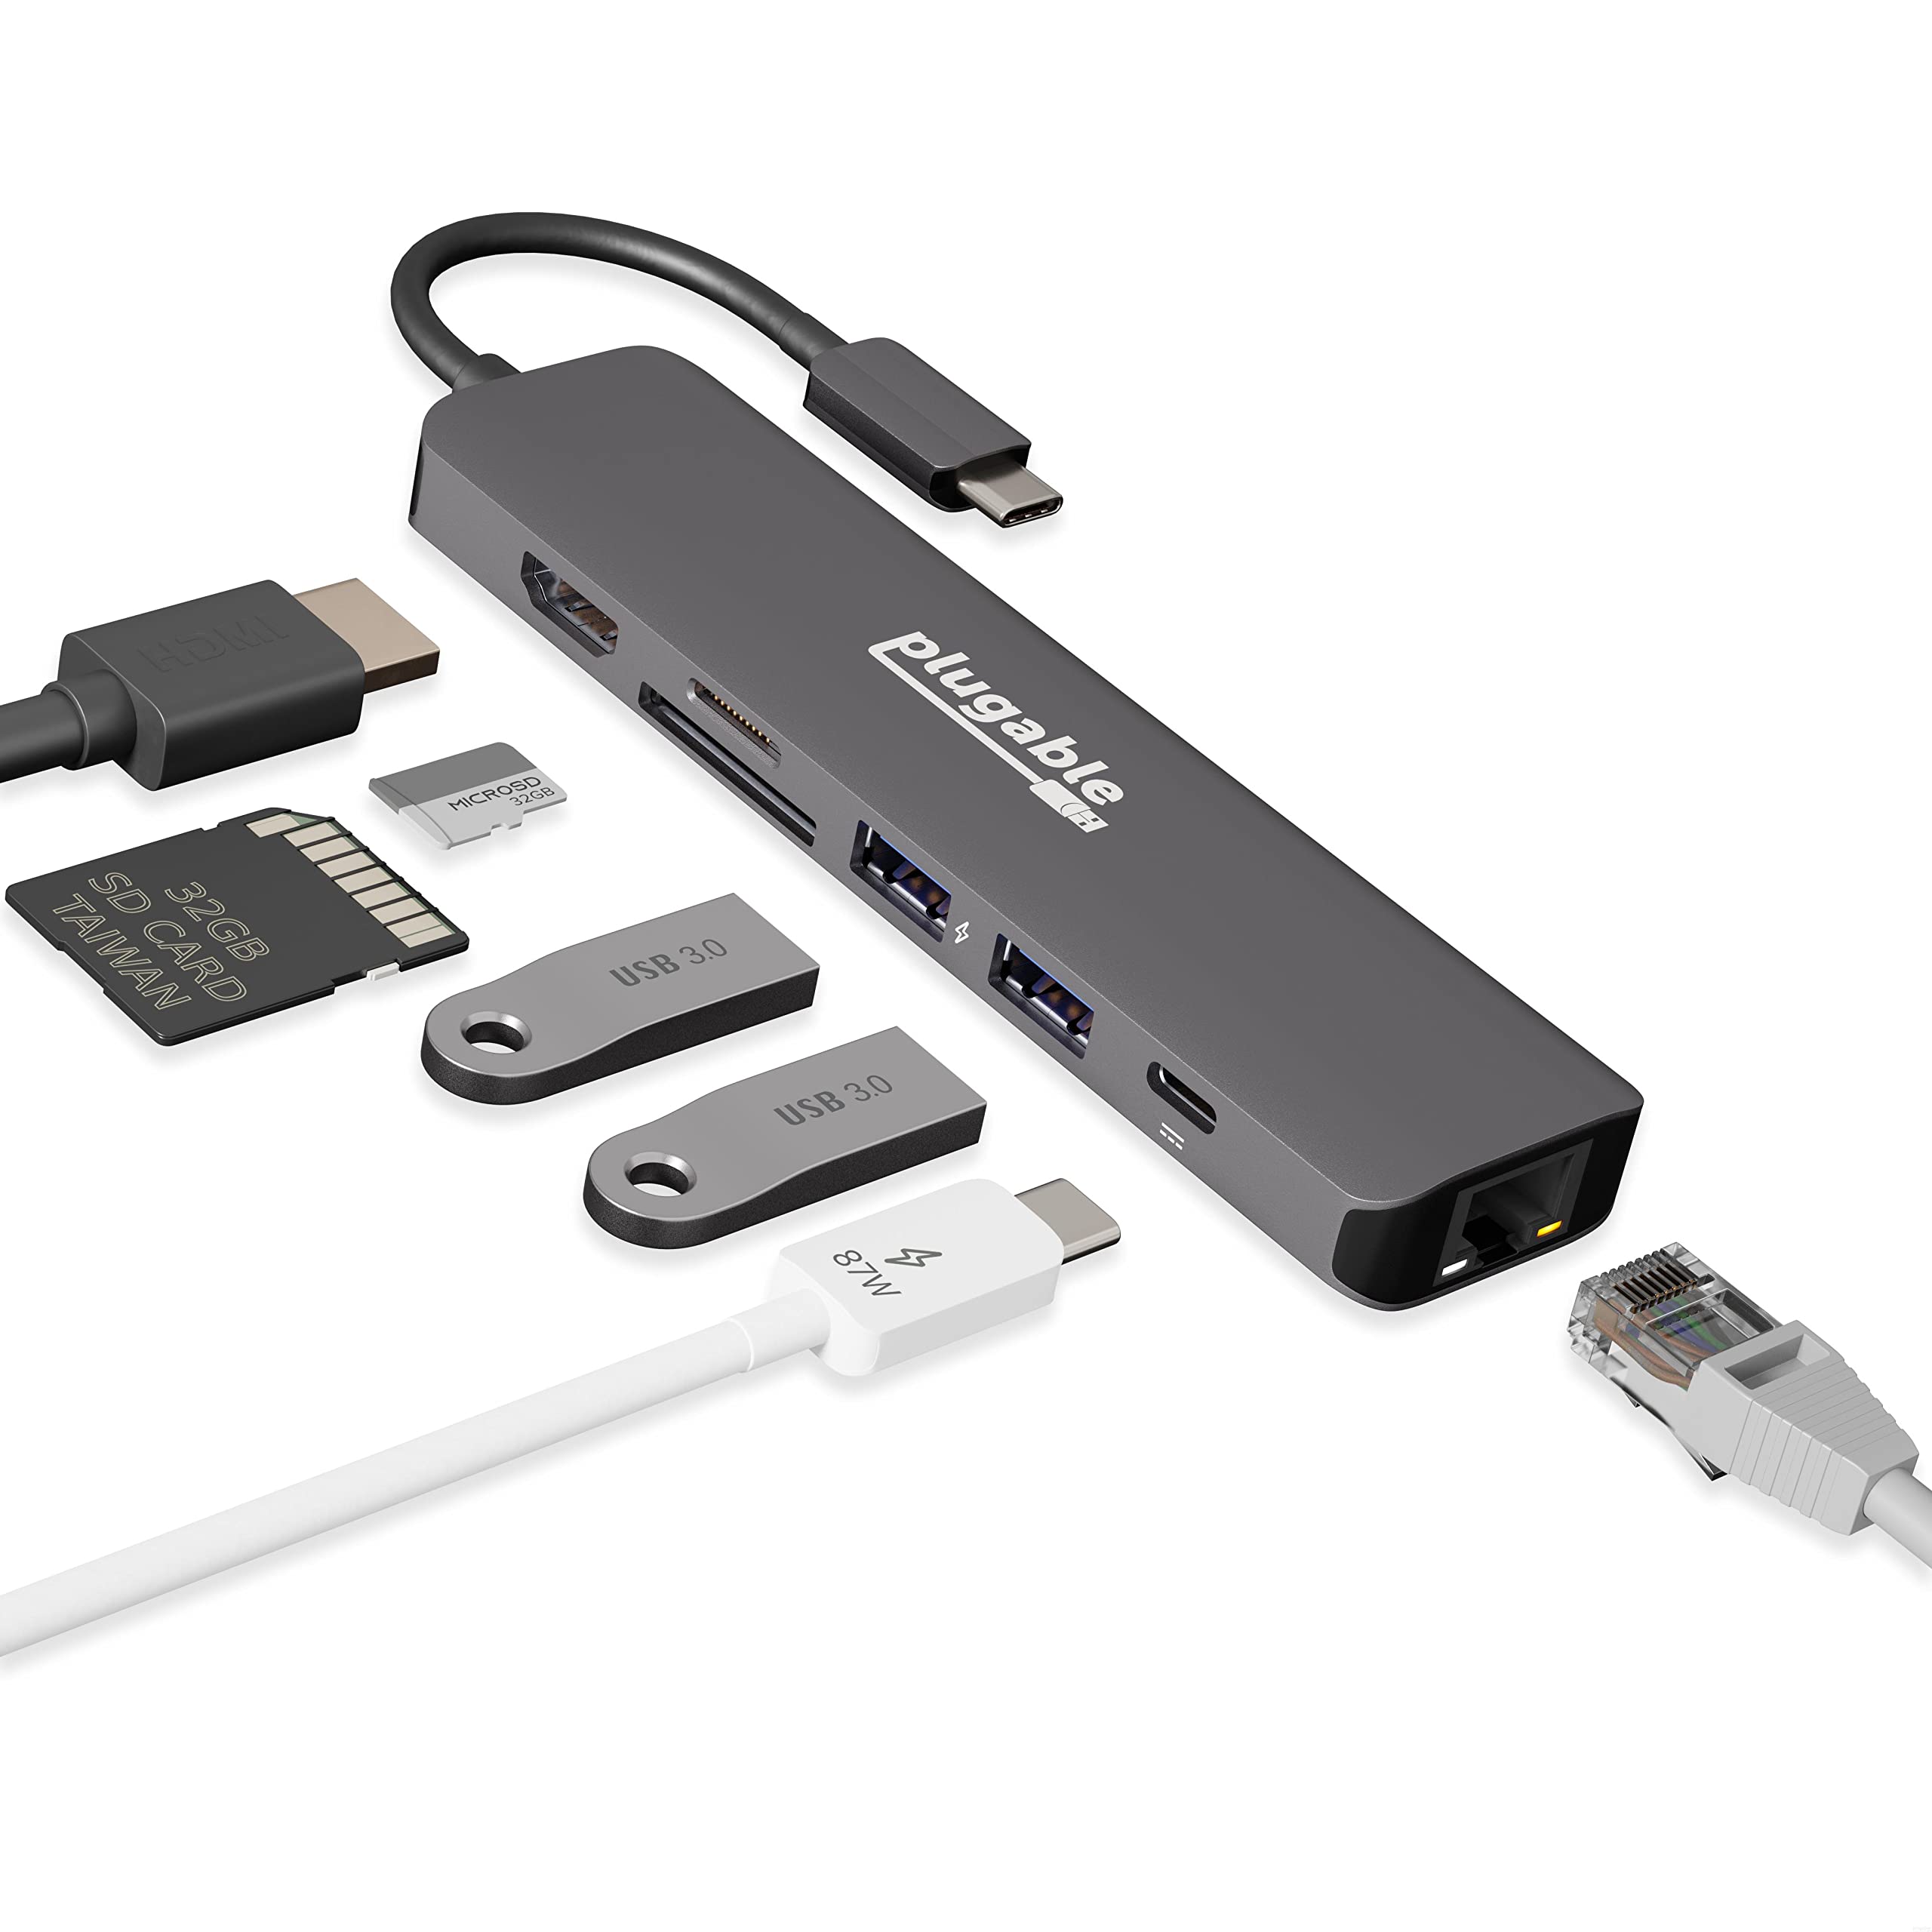 Amazon.com: Plugable 7-in-1 USB C Hub Multiport Adapter with Ethernet (87W Charging) $33.95